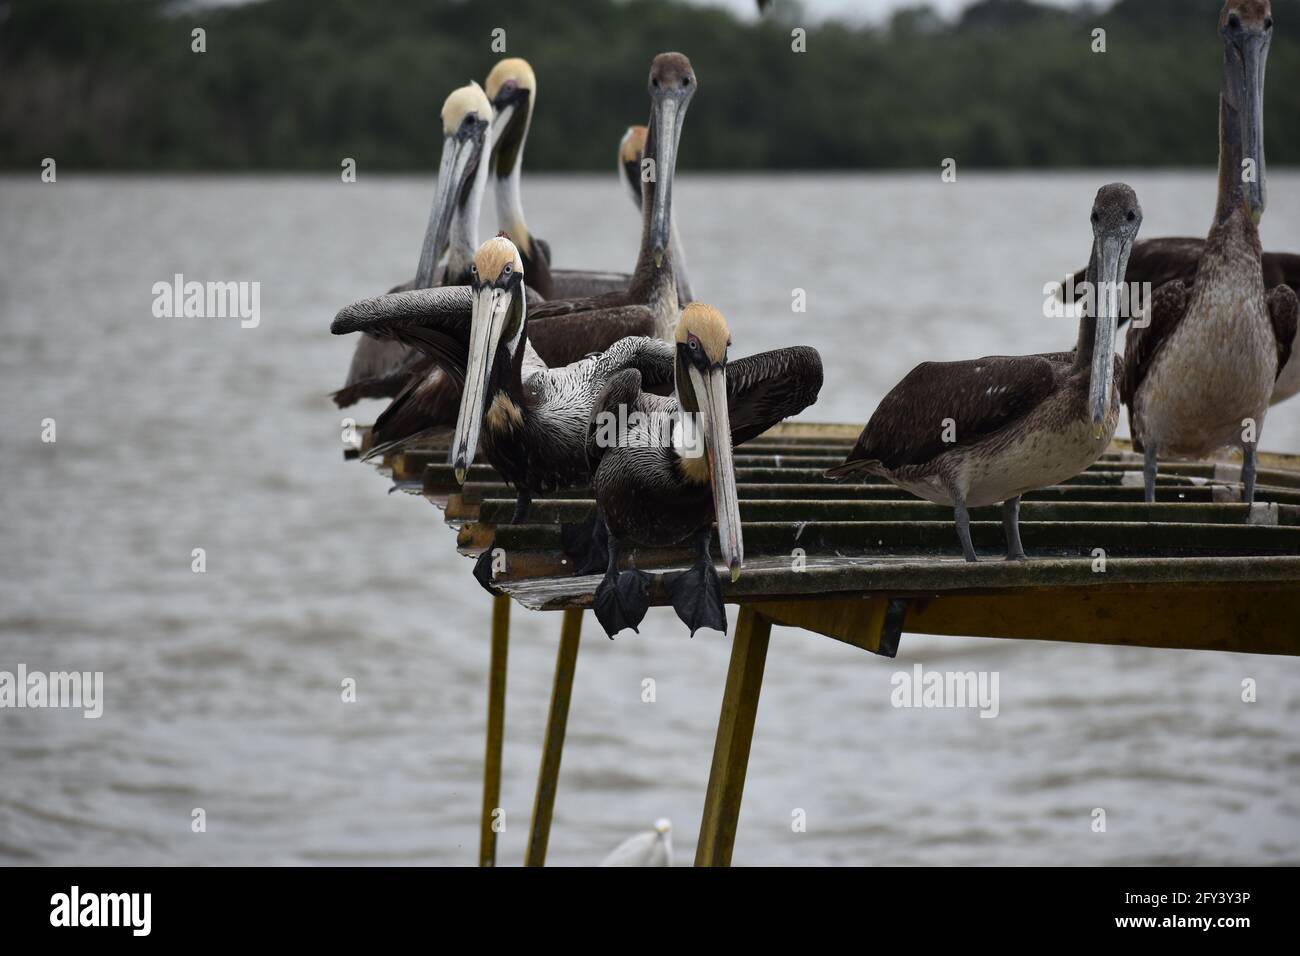 A flock of pelicans on the top of a fishing boat in Orange Valley, Trinidad and Tobago. Stock Photo